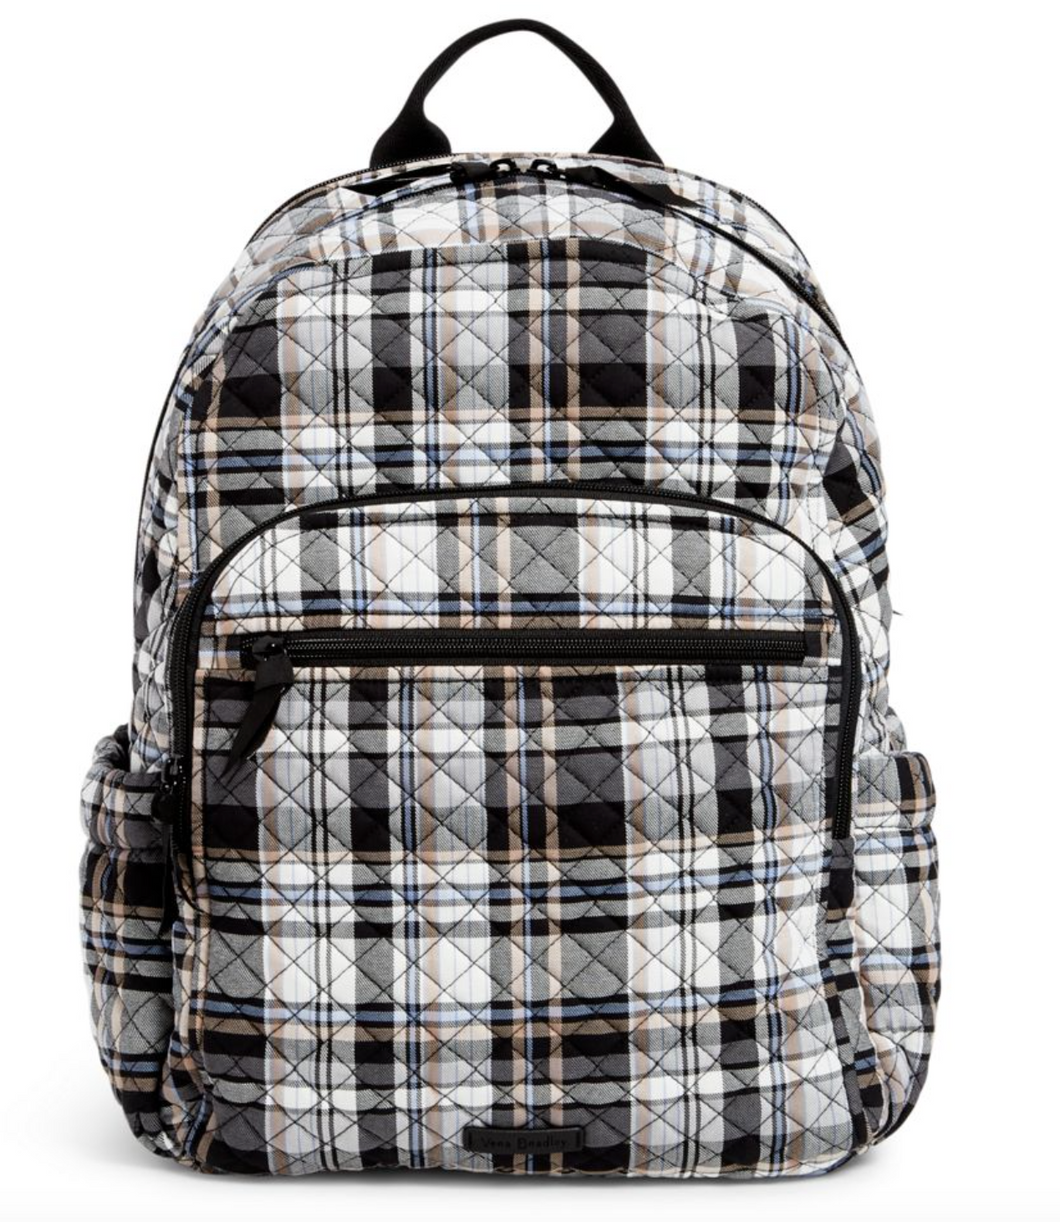 COZY PLAID NEUTRAL CAMPUS BACKPACK